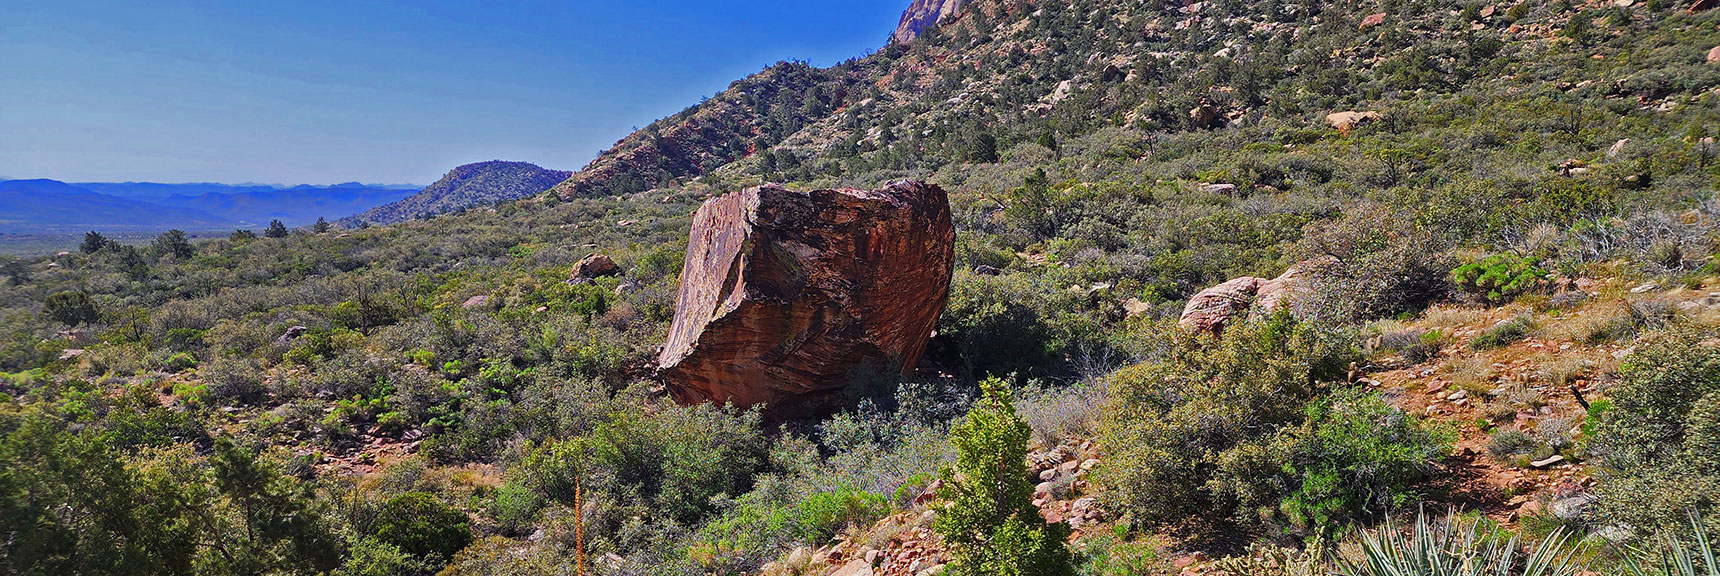 Head Up Juniper Canyon on an Unmarked Trail to Juniper Canyon Landmark Boulder | Juniper Canyon | Red Rock Canyon National Conservation Area, Nevada | David Smith | LasVegasAreaTrails.com